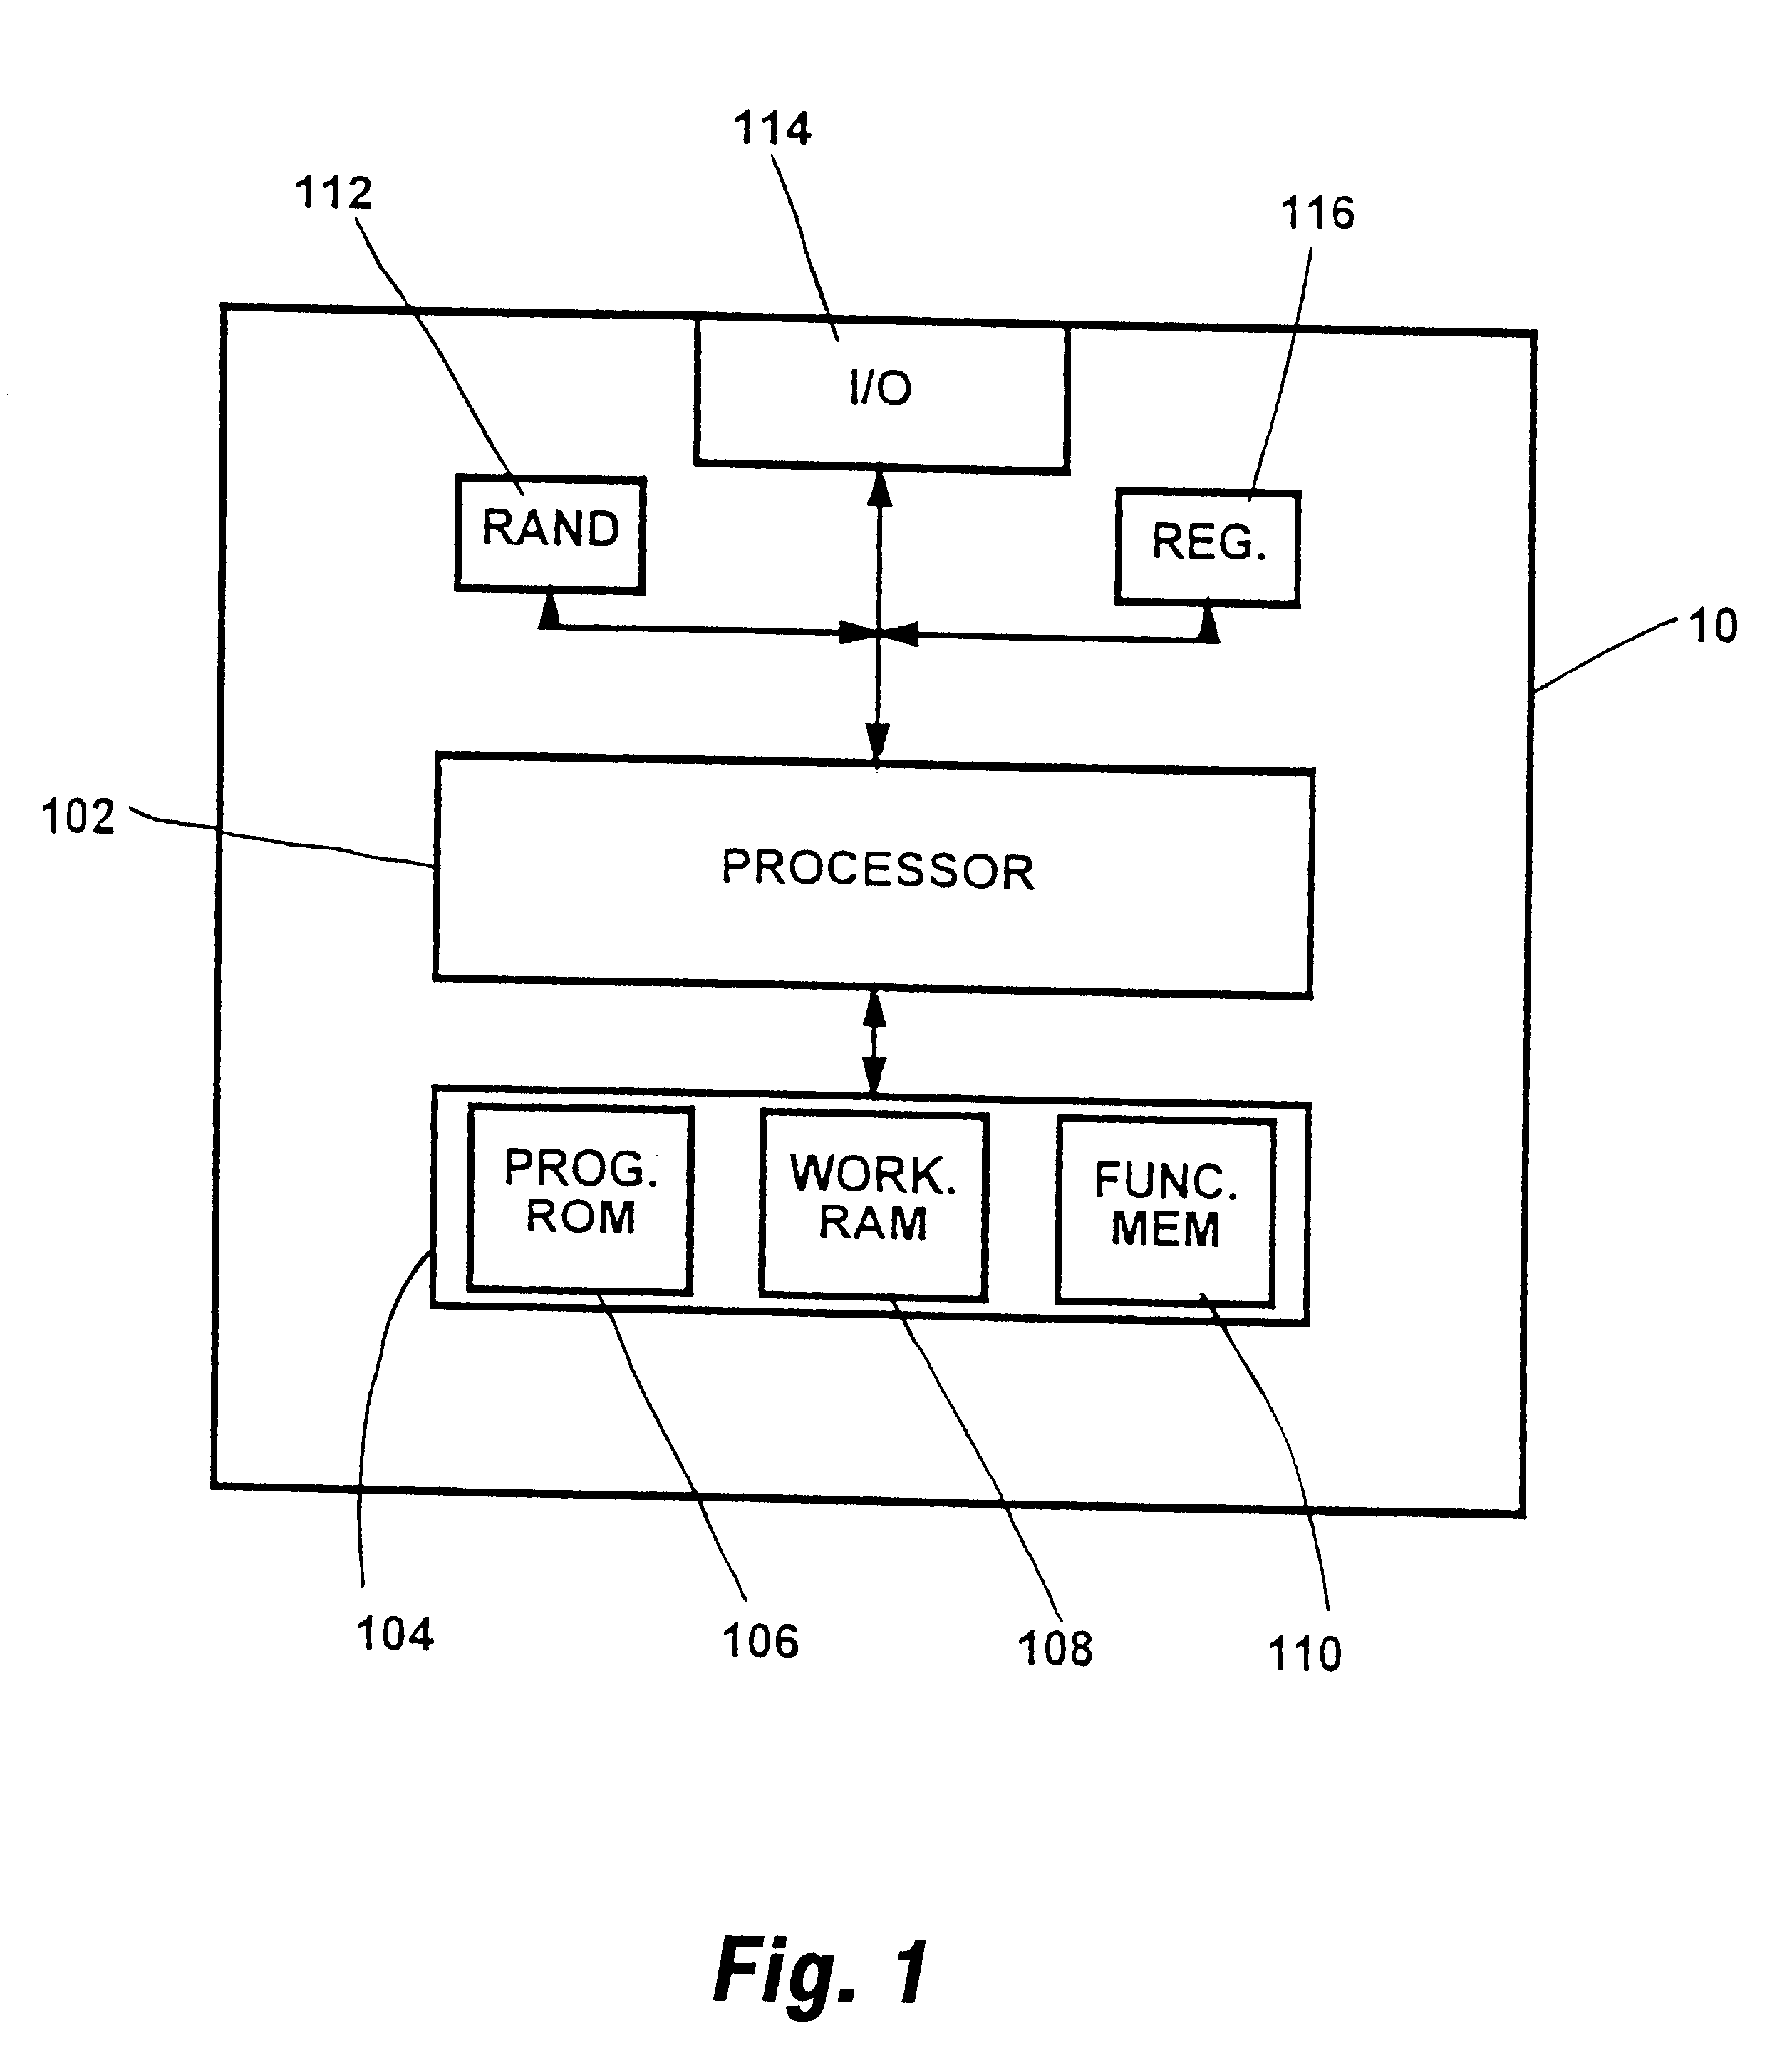 Method and apparatus for iteratively optimizing functional outputs with respect to inputs